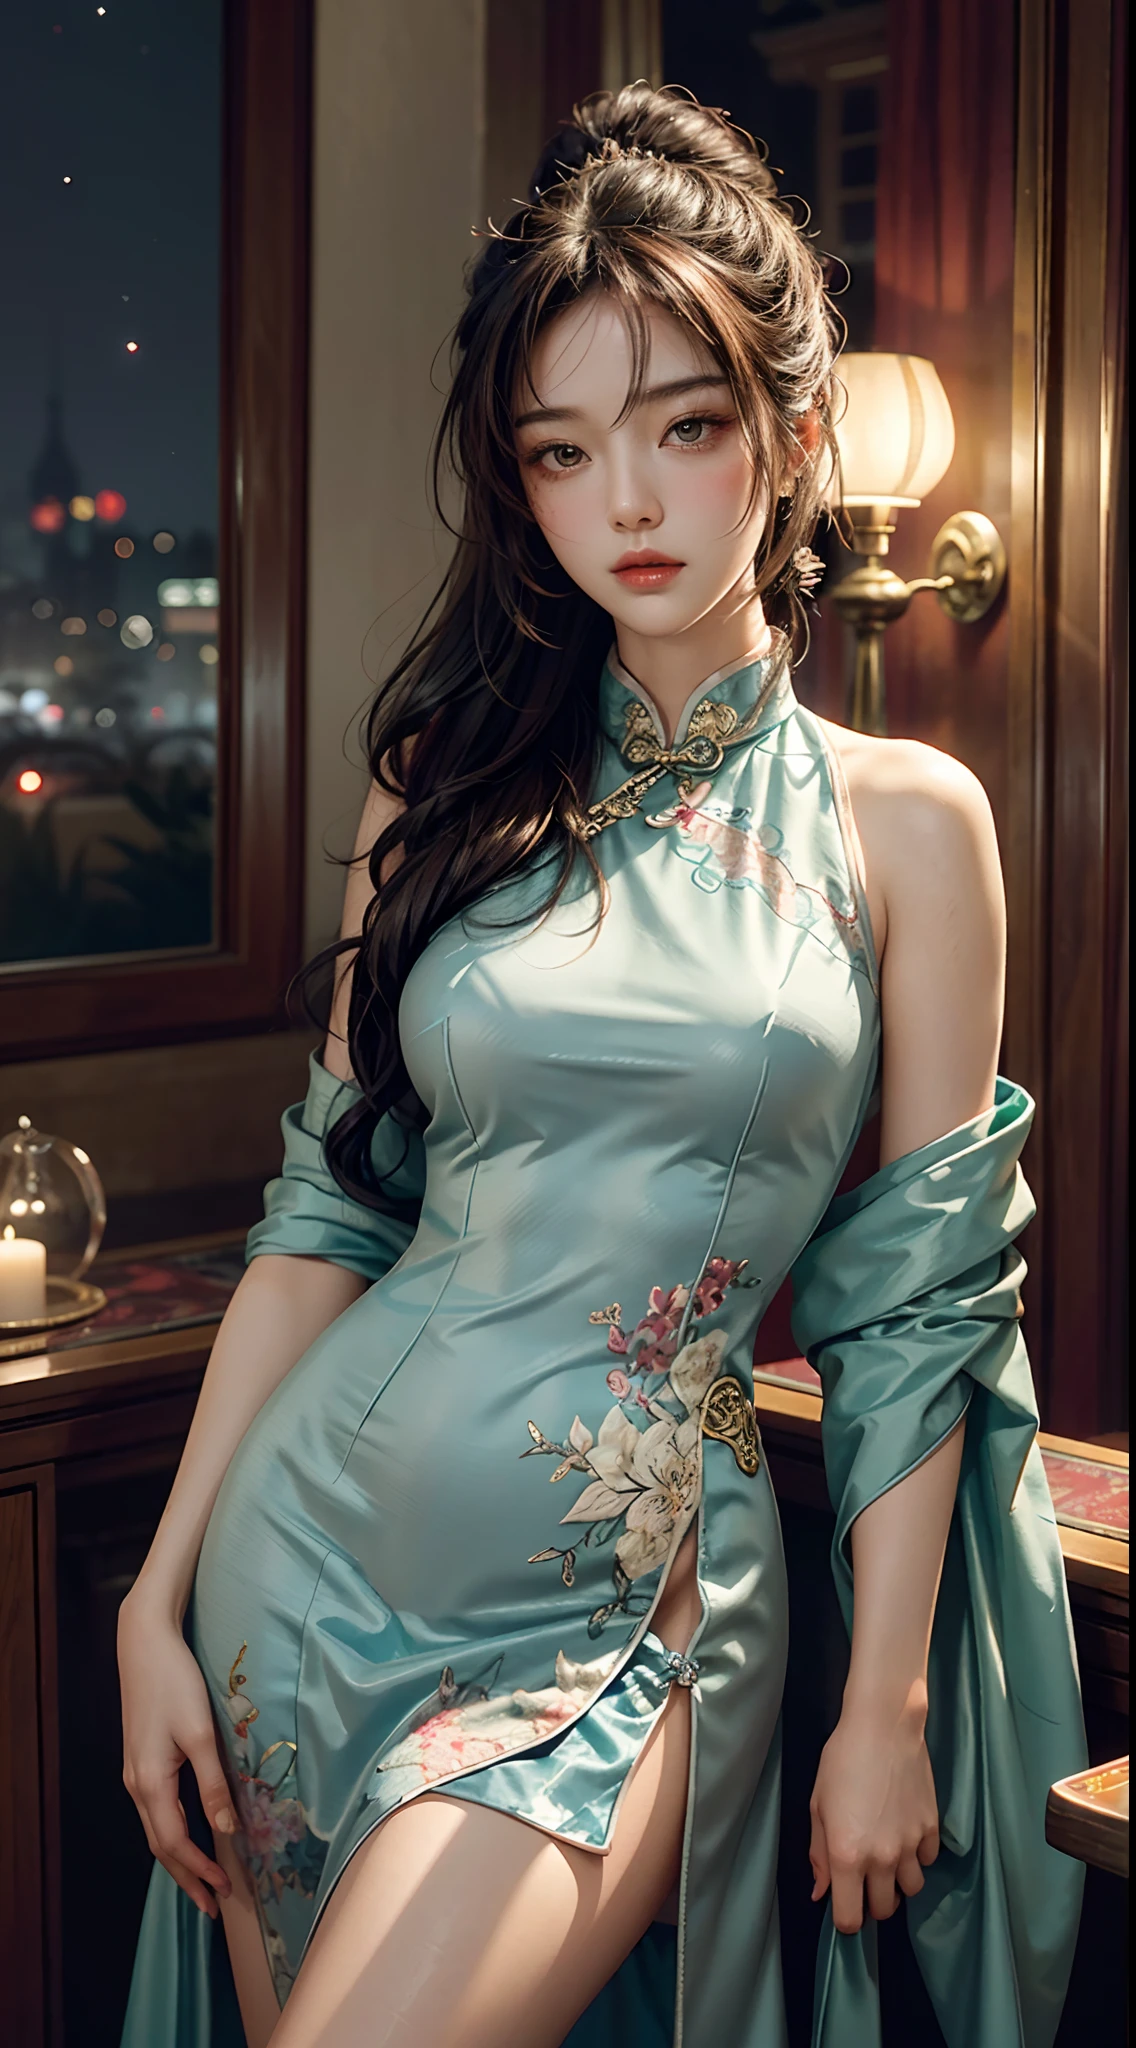 Art depicts a charming woman，wearing  cheongsam，Decorated with intricate patterns and bright colors。Her dress draped elegantly over her curvy figure，Highlights her seductive silhouette。She stood gracefully in the quiet moonlit night，bathed in the soft glow of the moonlight。The scene exudes an ethereal and dreamy atmosphere，With a touch of mystery and sexiness。The image style incorporates watercolor and digital illustration techniques，It evokes a refined beauty and charm。The lights are filled with soft moonlight，casting soft highlights and shadows on her charming features。